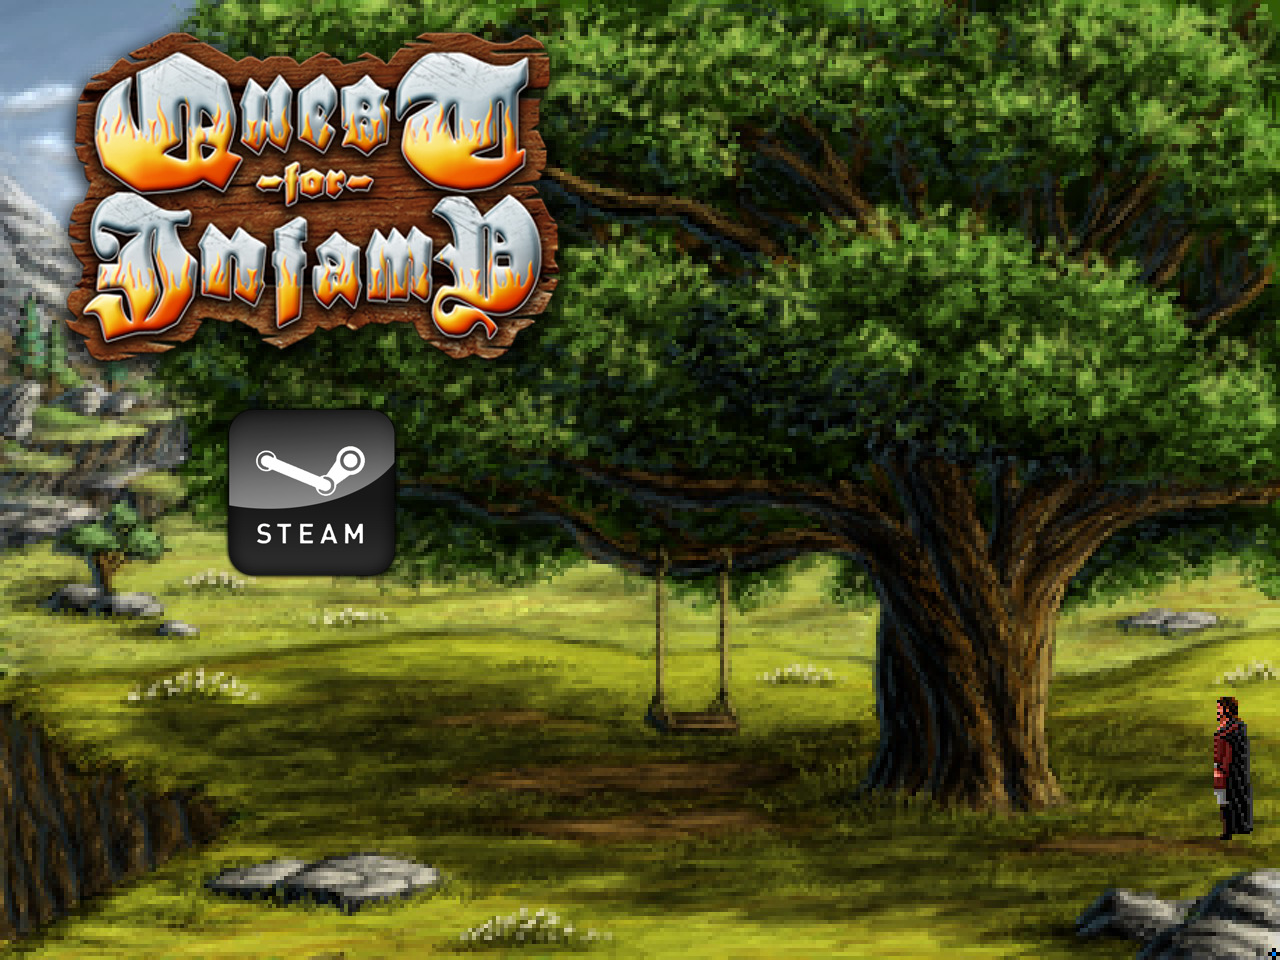 Quest for Infamy is an indie Adventure/RPG game inspired by the lies of Sierra&#8217;s Classic Quest For Glory Series. It featured 3 distinct classes and over 200 hand-drawn screens to fully explore.Best part of all it is now available on Steam! Will you lead Roehm on a Quest For Infamy?Gonçalo GonçalvesSocial Media AssociatePhoenix Online Studios